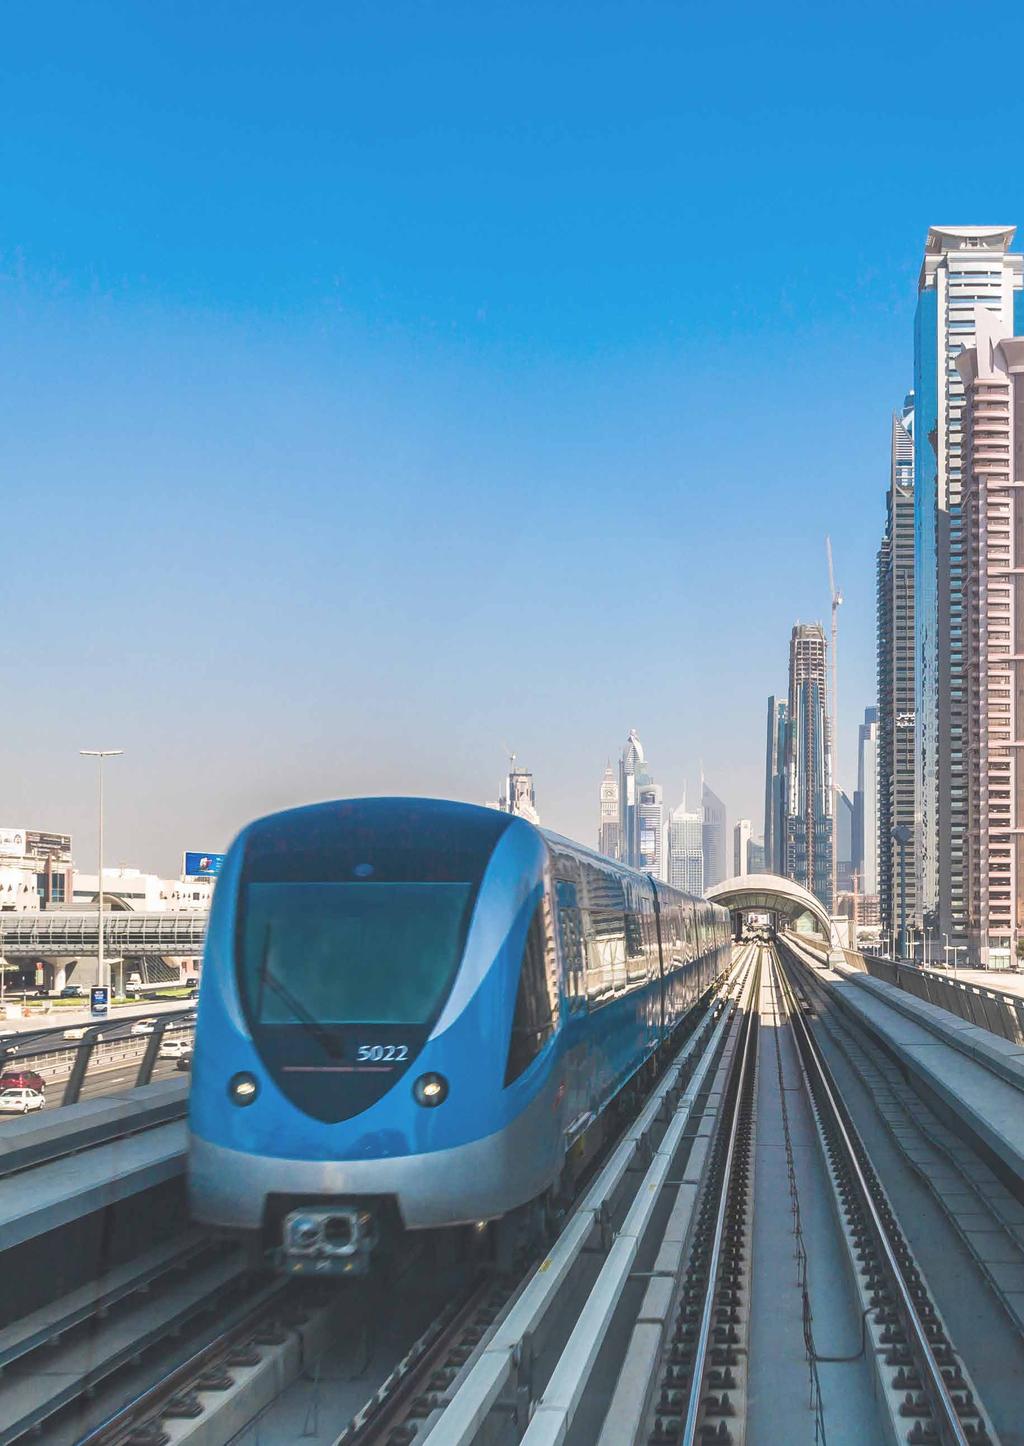 PUBLIC TRANSPORT SERVICES IN DUBAI (H1/2018) 17% SHARE OF PUBLIC TRANSPORT IN PEOPLE S MOBILITY 106.